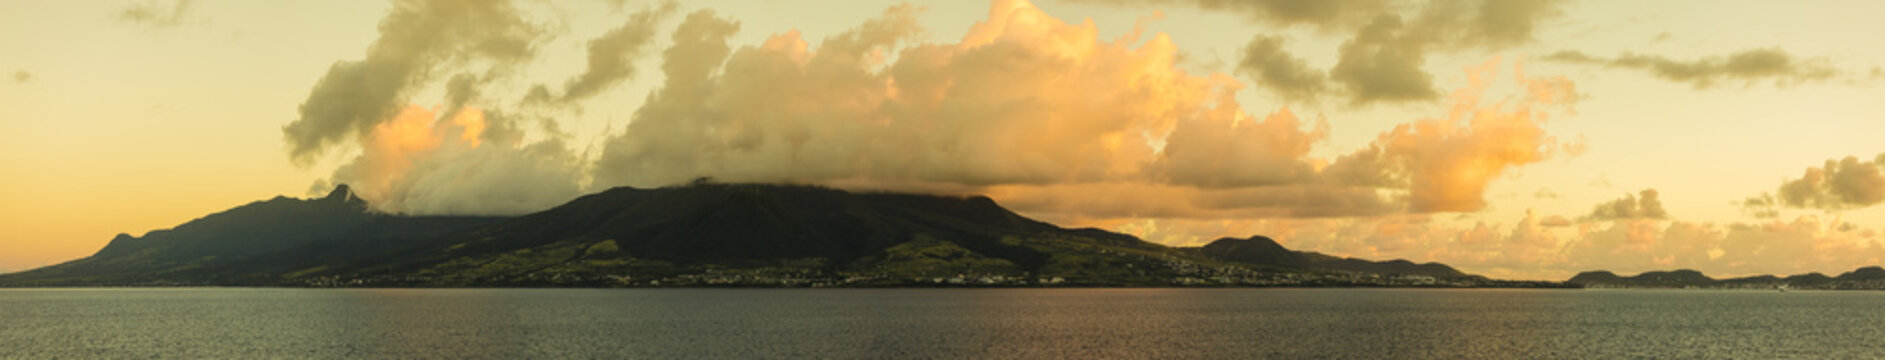 Panorama of the island of St Kitts in early dawn.